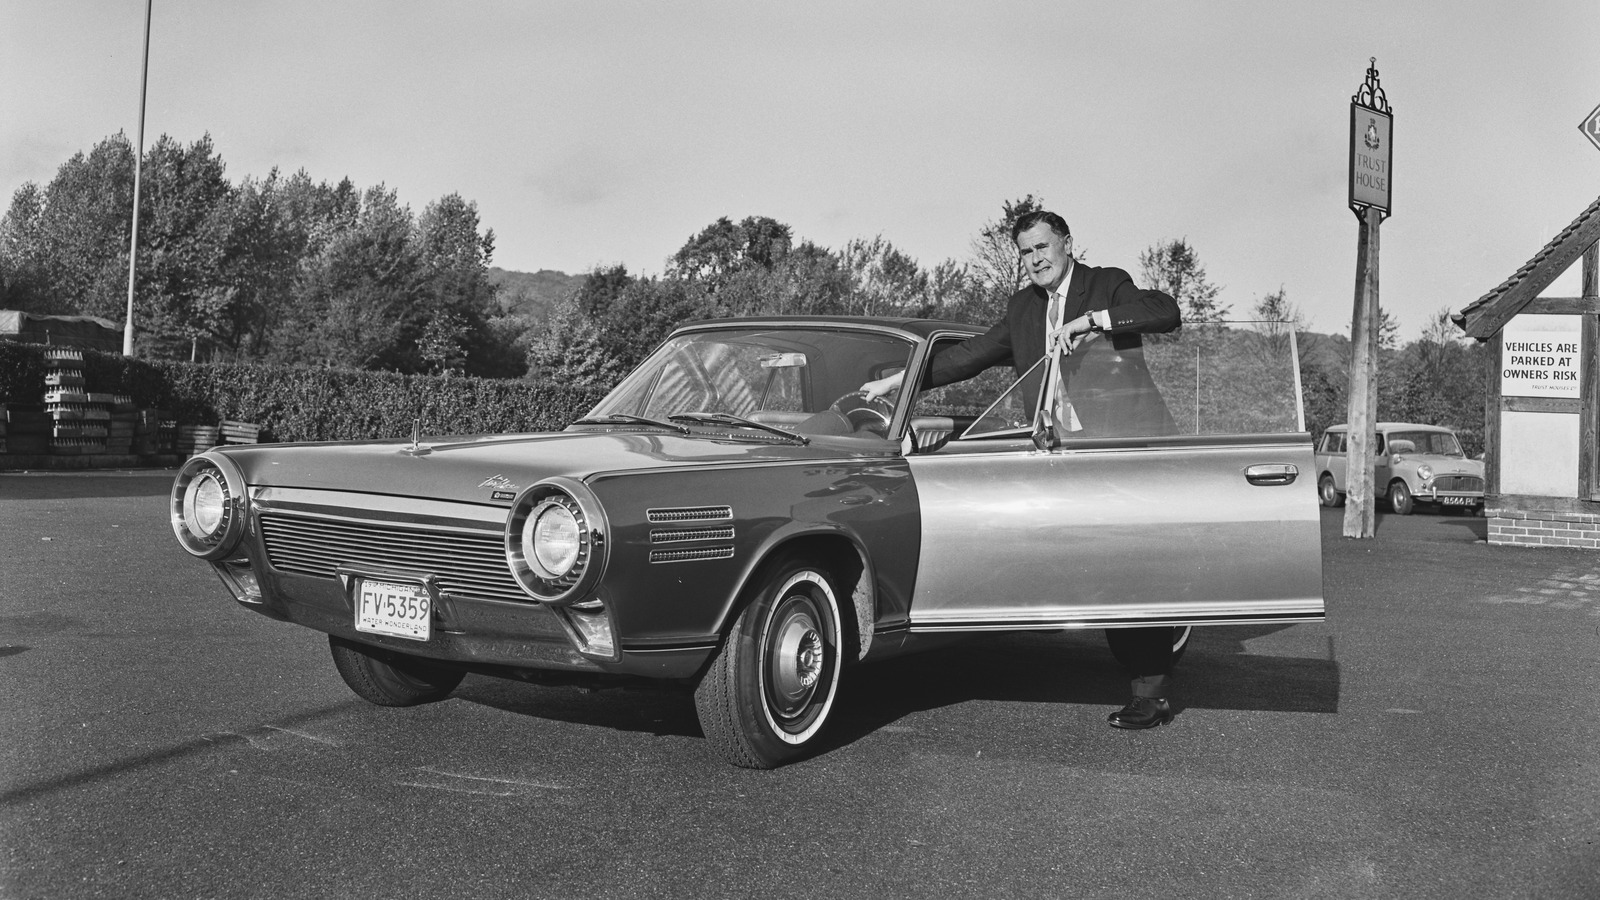 What Happened To The Chrysler Turbine Car? (And Why Cars Don't Have Jet Engines Today)